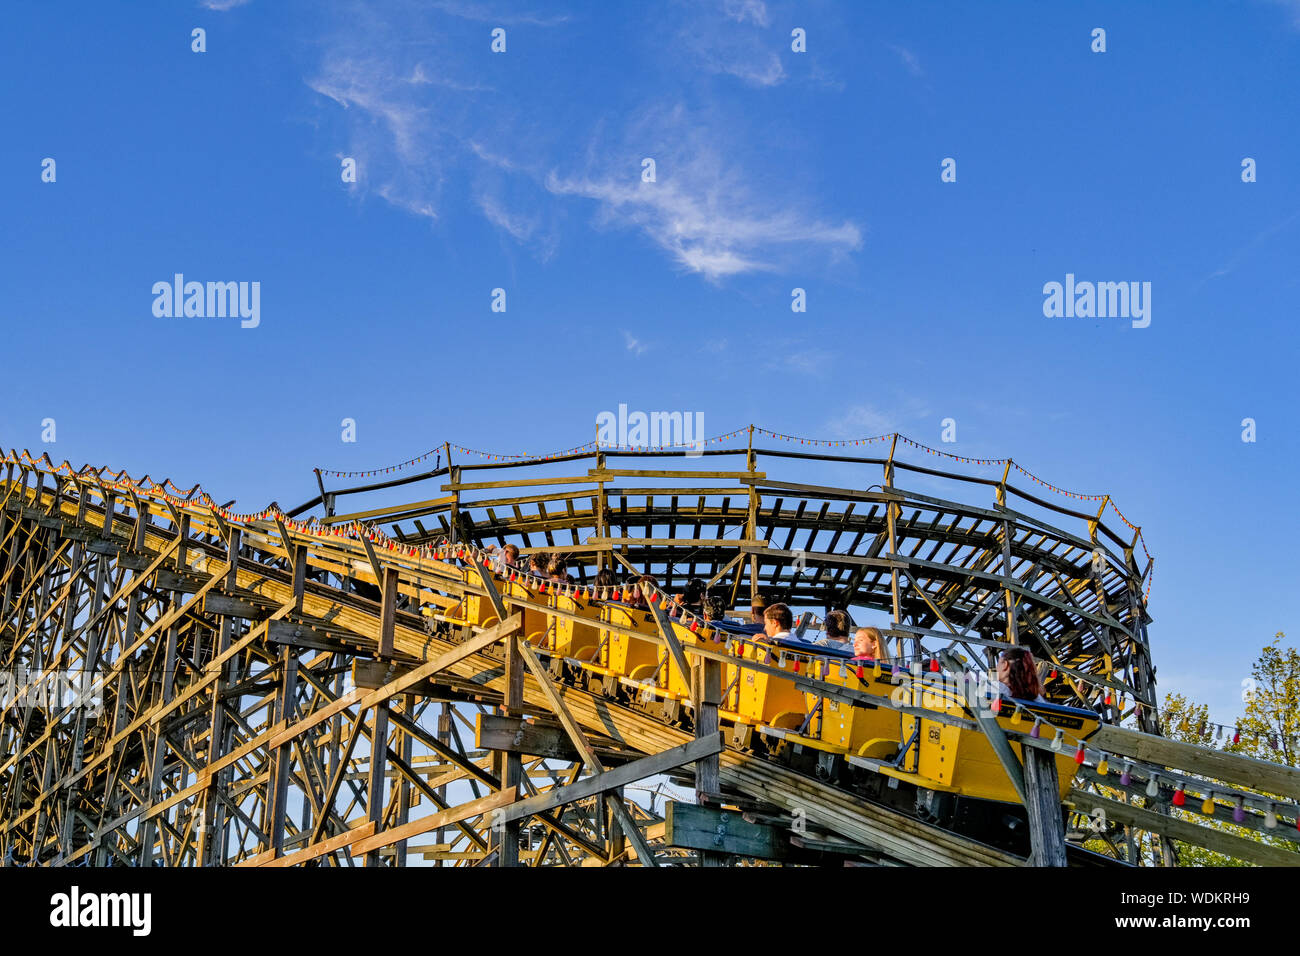 Vintage wooden roller coaster, Playland, Vancouver, British Columbia ...